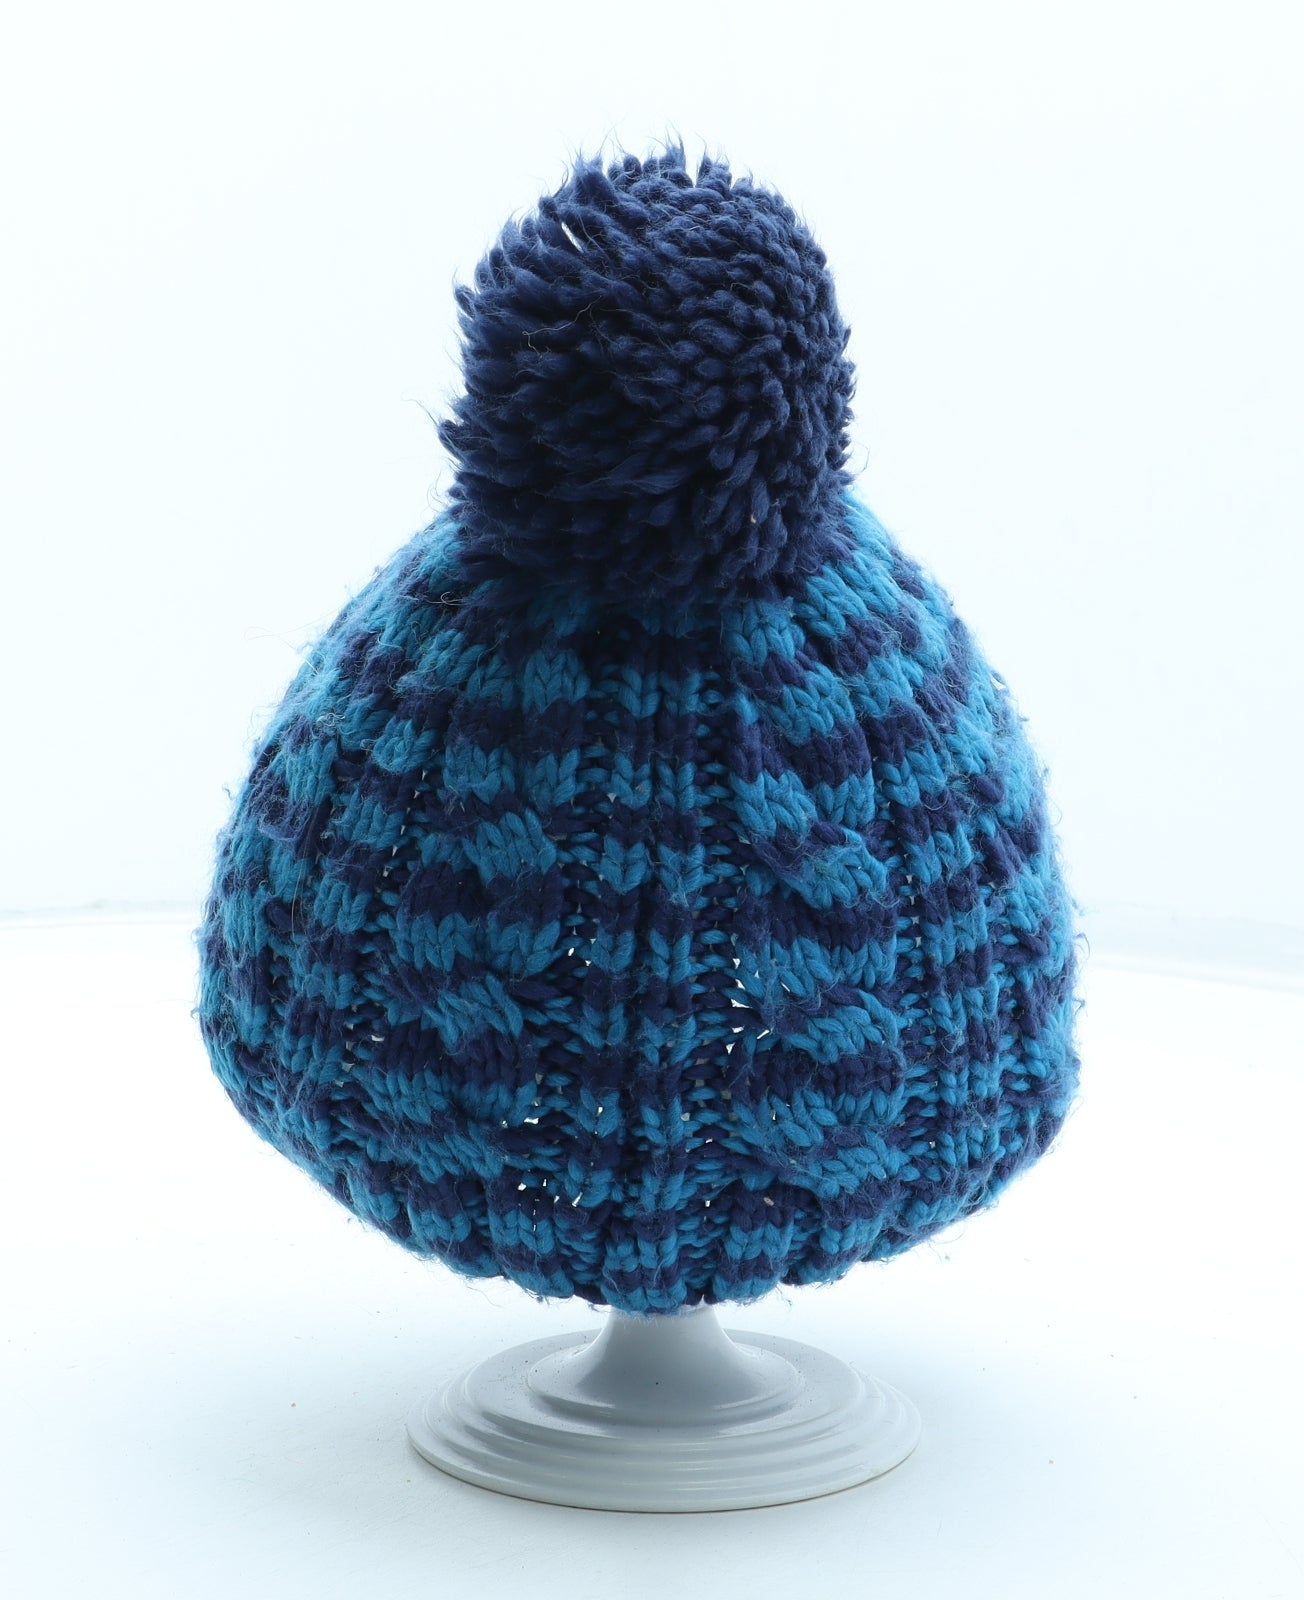 Marks and Spencer Boys Blue Striped Acrylic Bobble Hat Size S - Size 18-36 Months